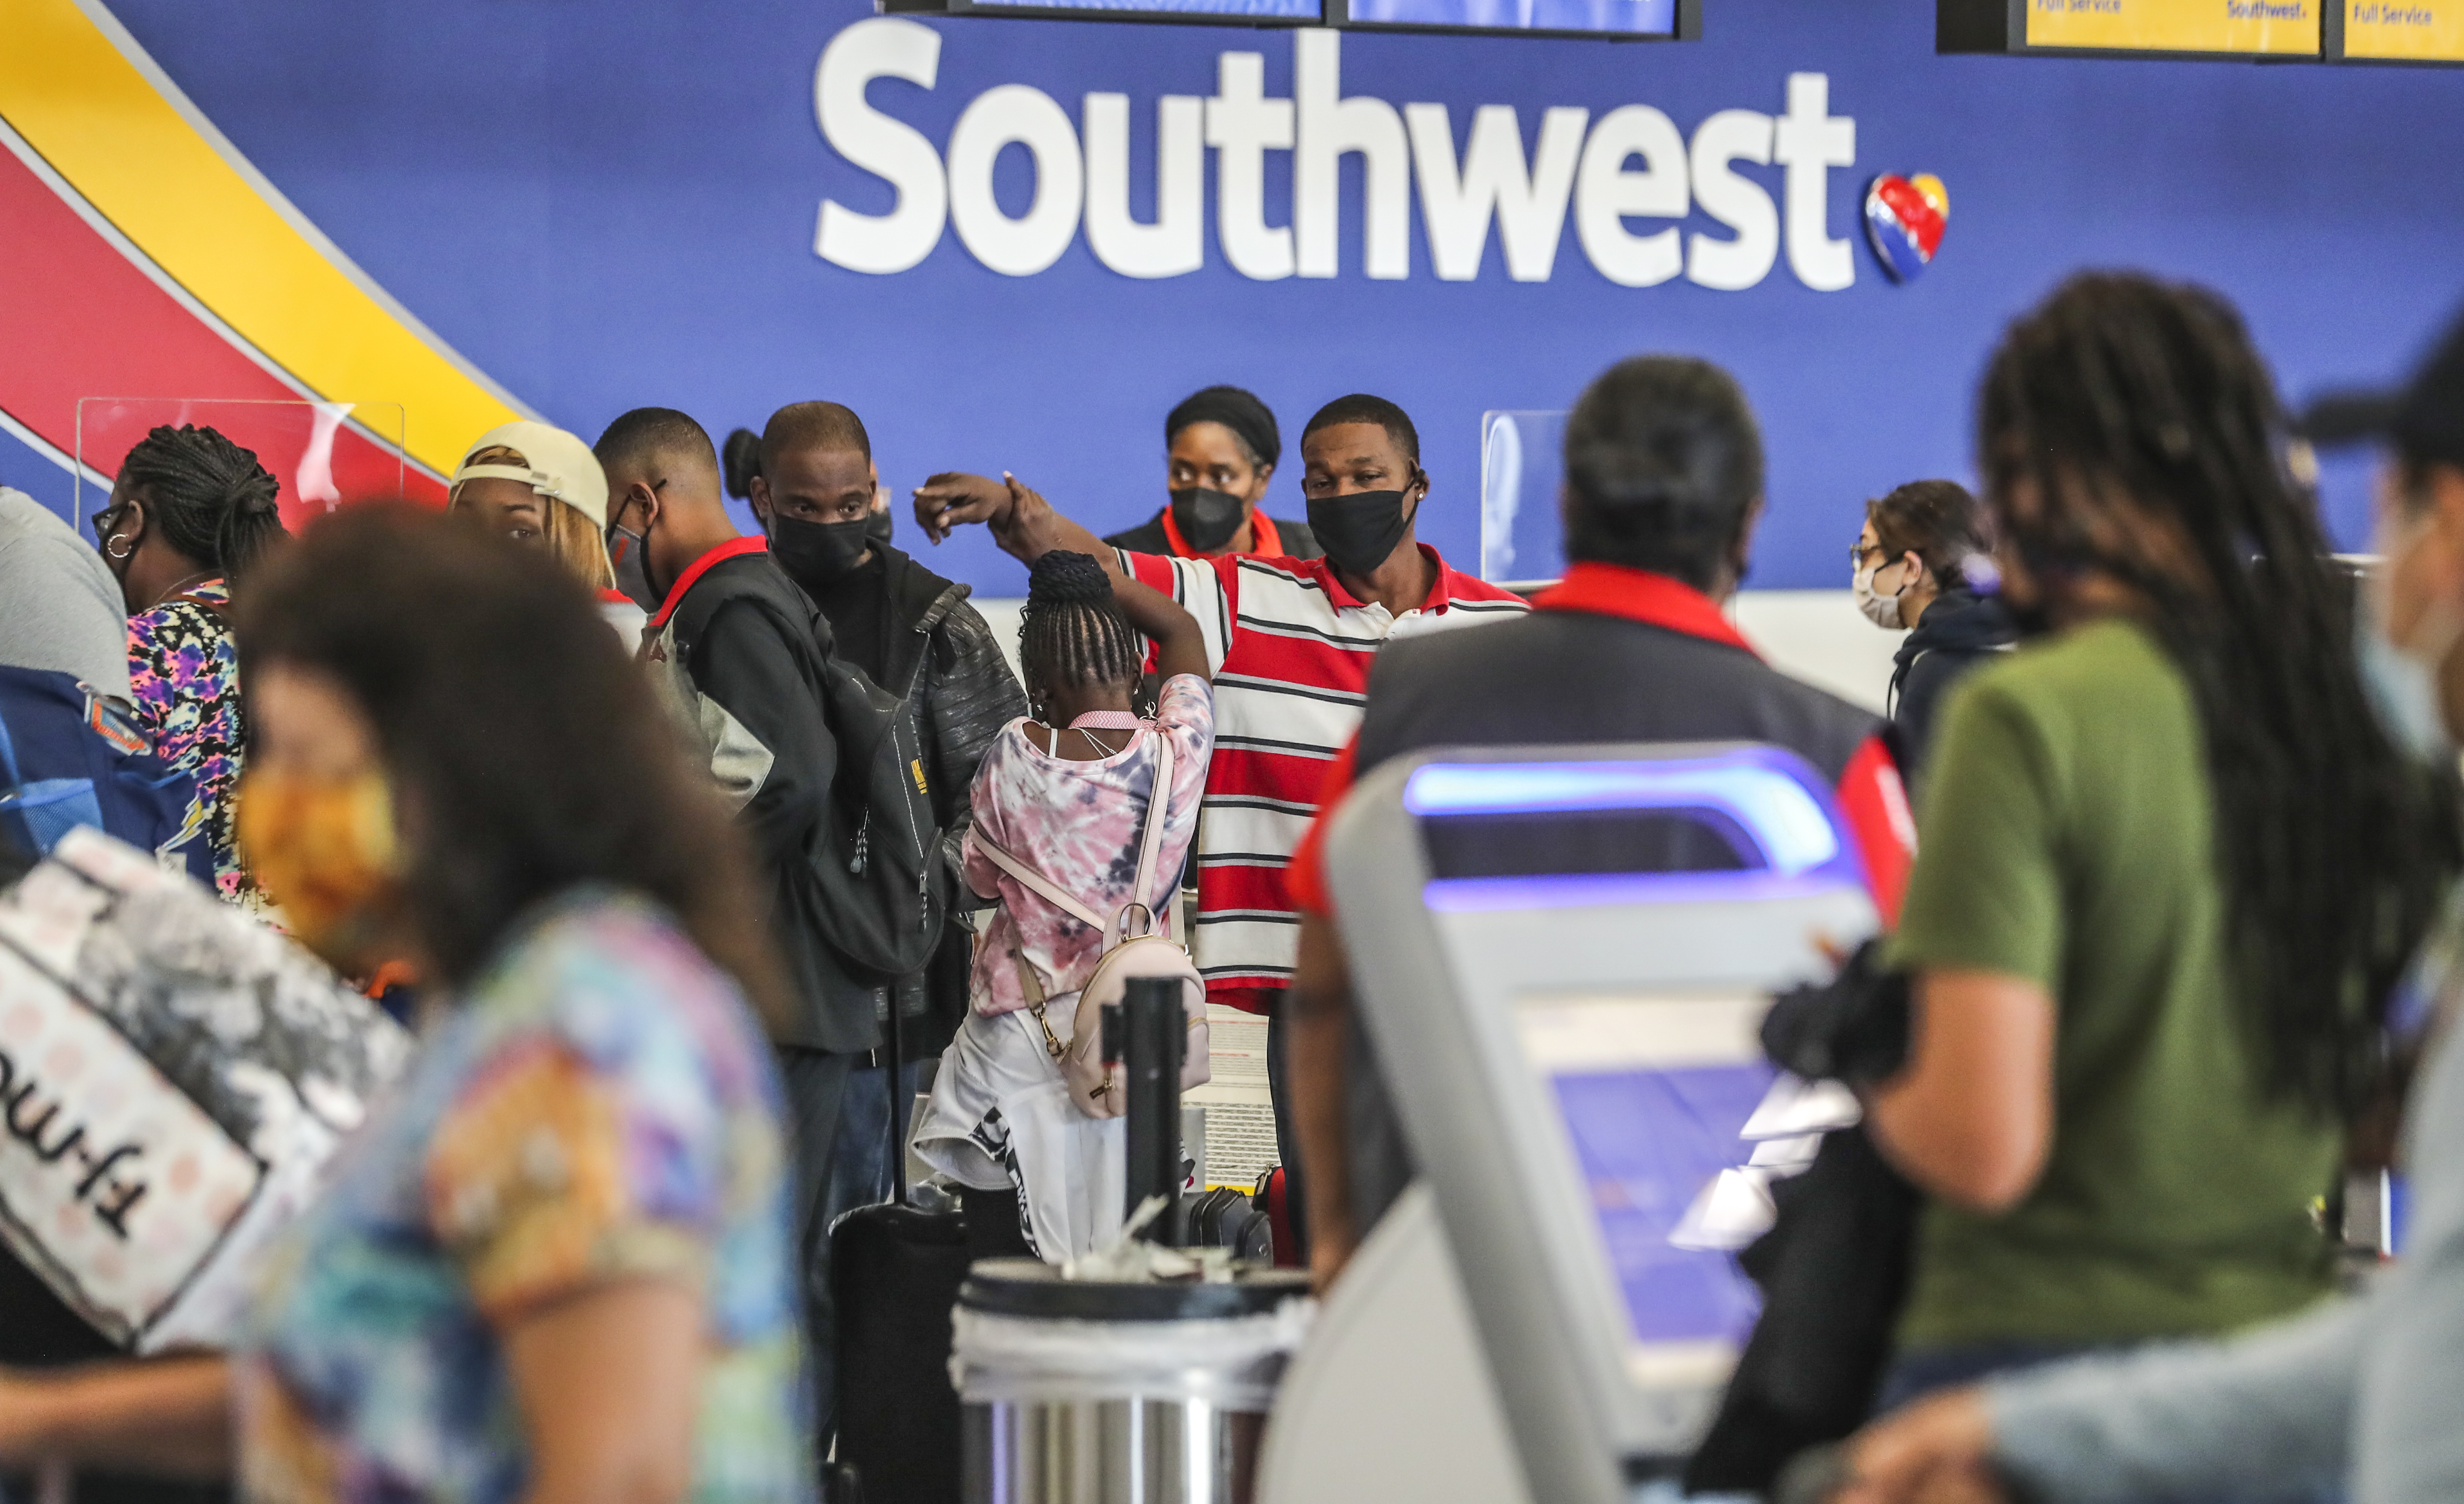 Southwest Airlines After 10 years serving Atlanta airport, scaled-back ambitions